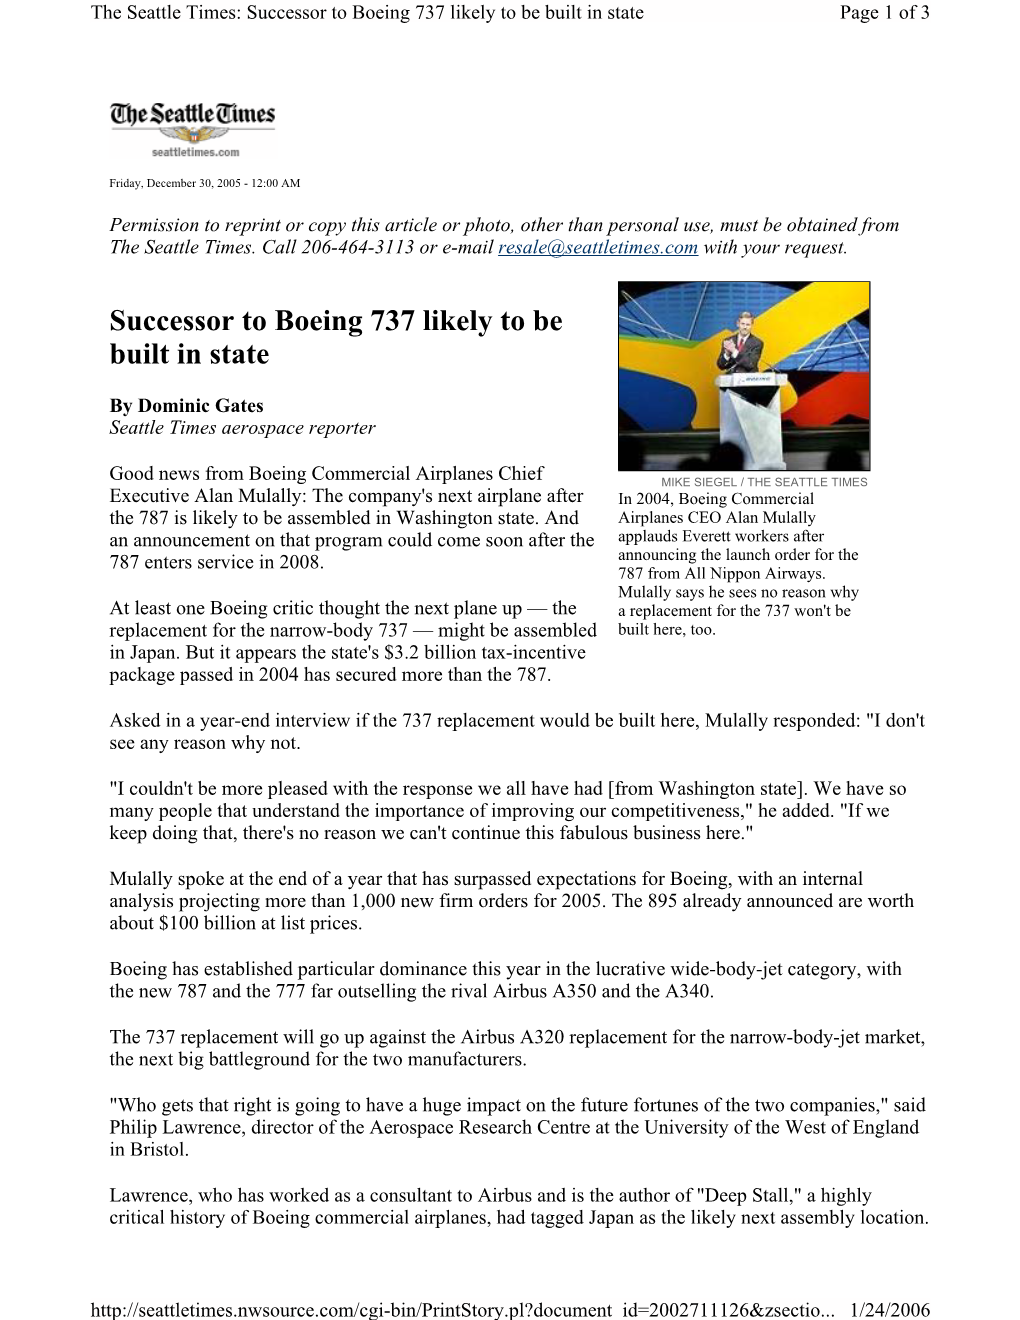 Successor to Boeing 737 Likely to Be Built in State Page 1 of 3